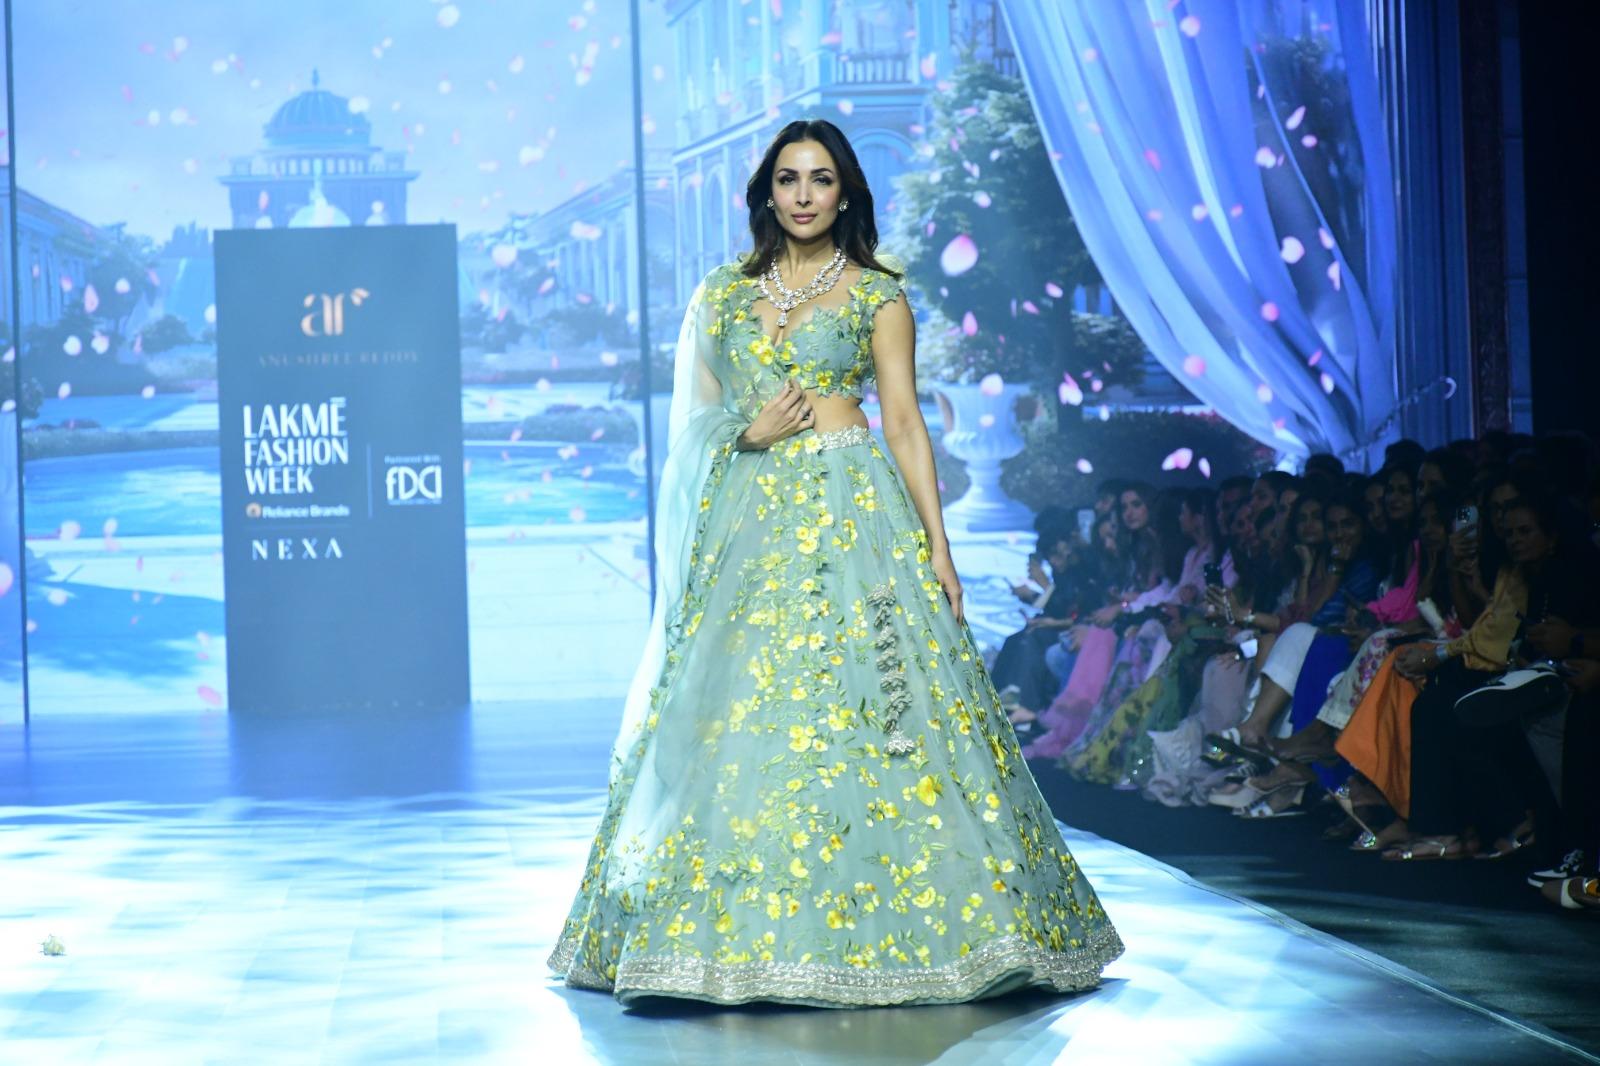 Malaika Arora graced the runway for Anushree Reddy and Ritika Mirchandani during Day 4 of Lakme Fashion Week in collaboration with FDCI. She donned a stunning blue lehenga embellished with intricate yellow floral patterns on the skirt